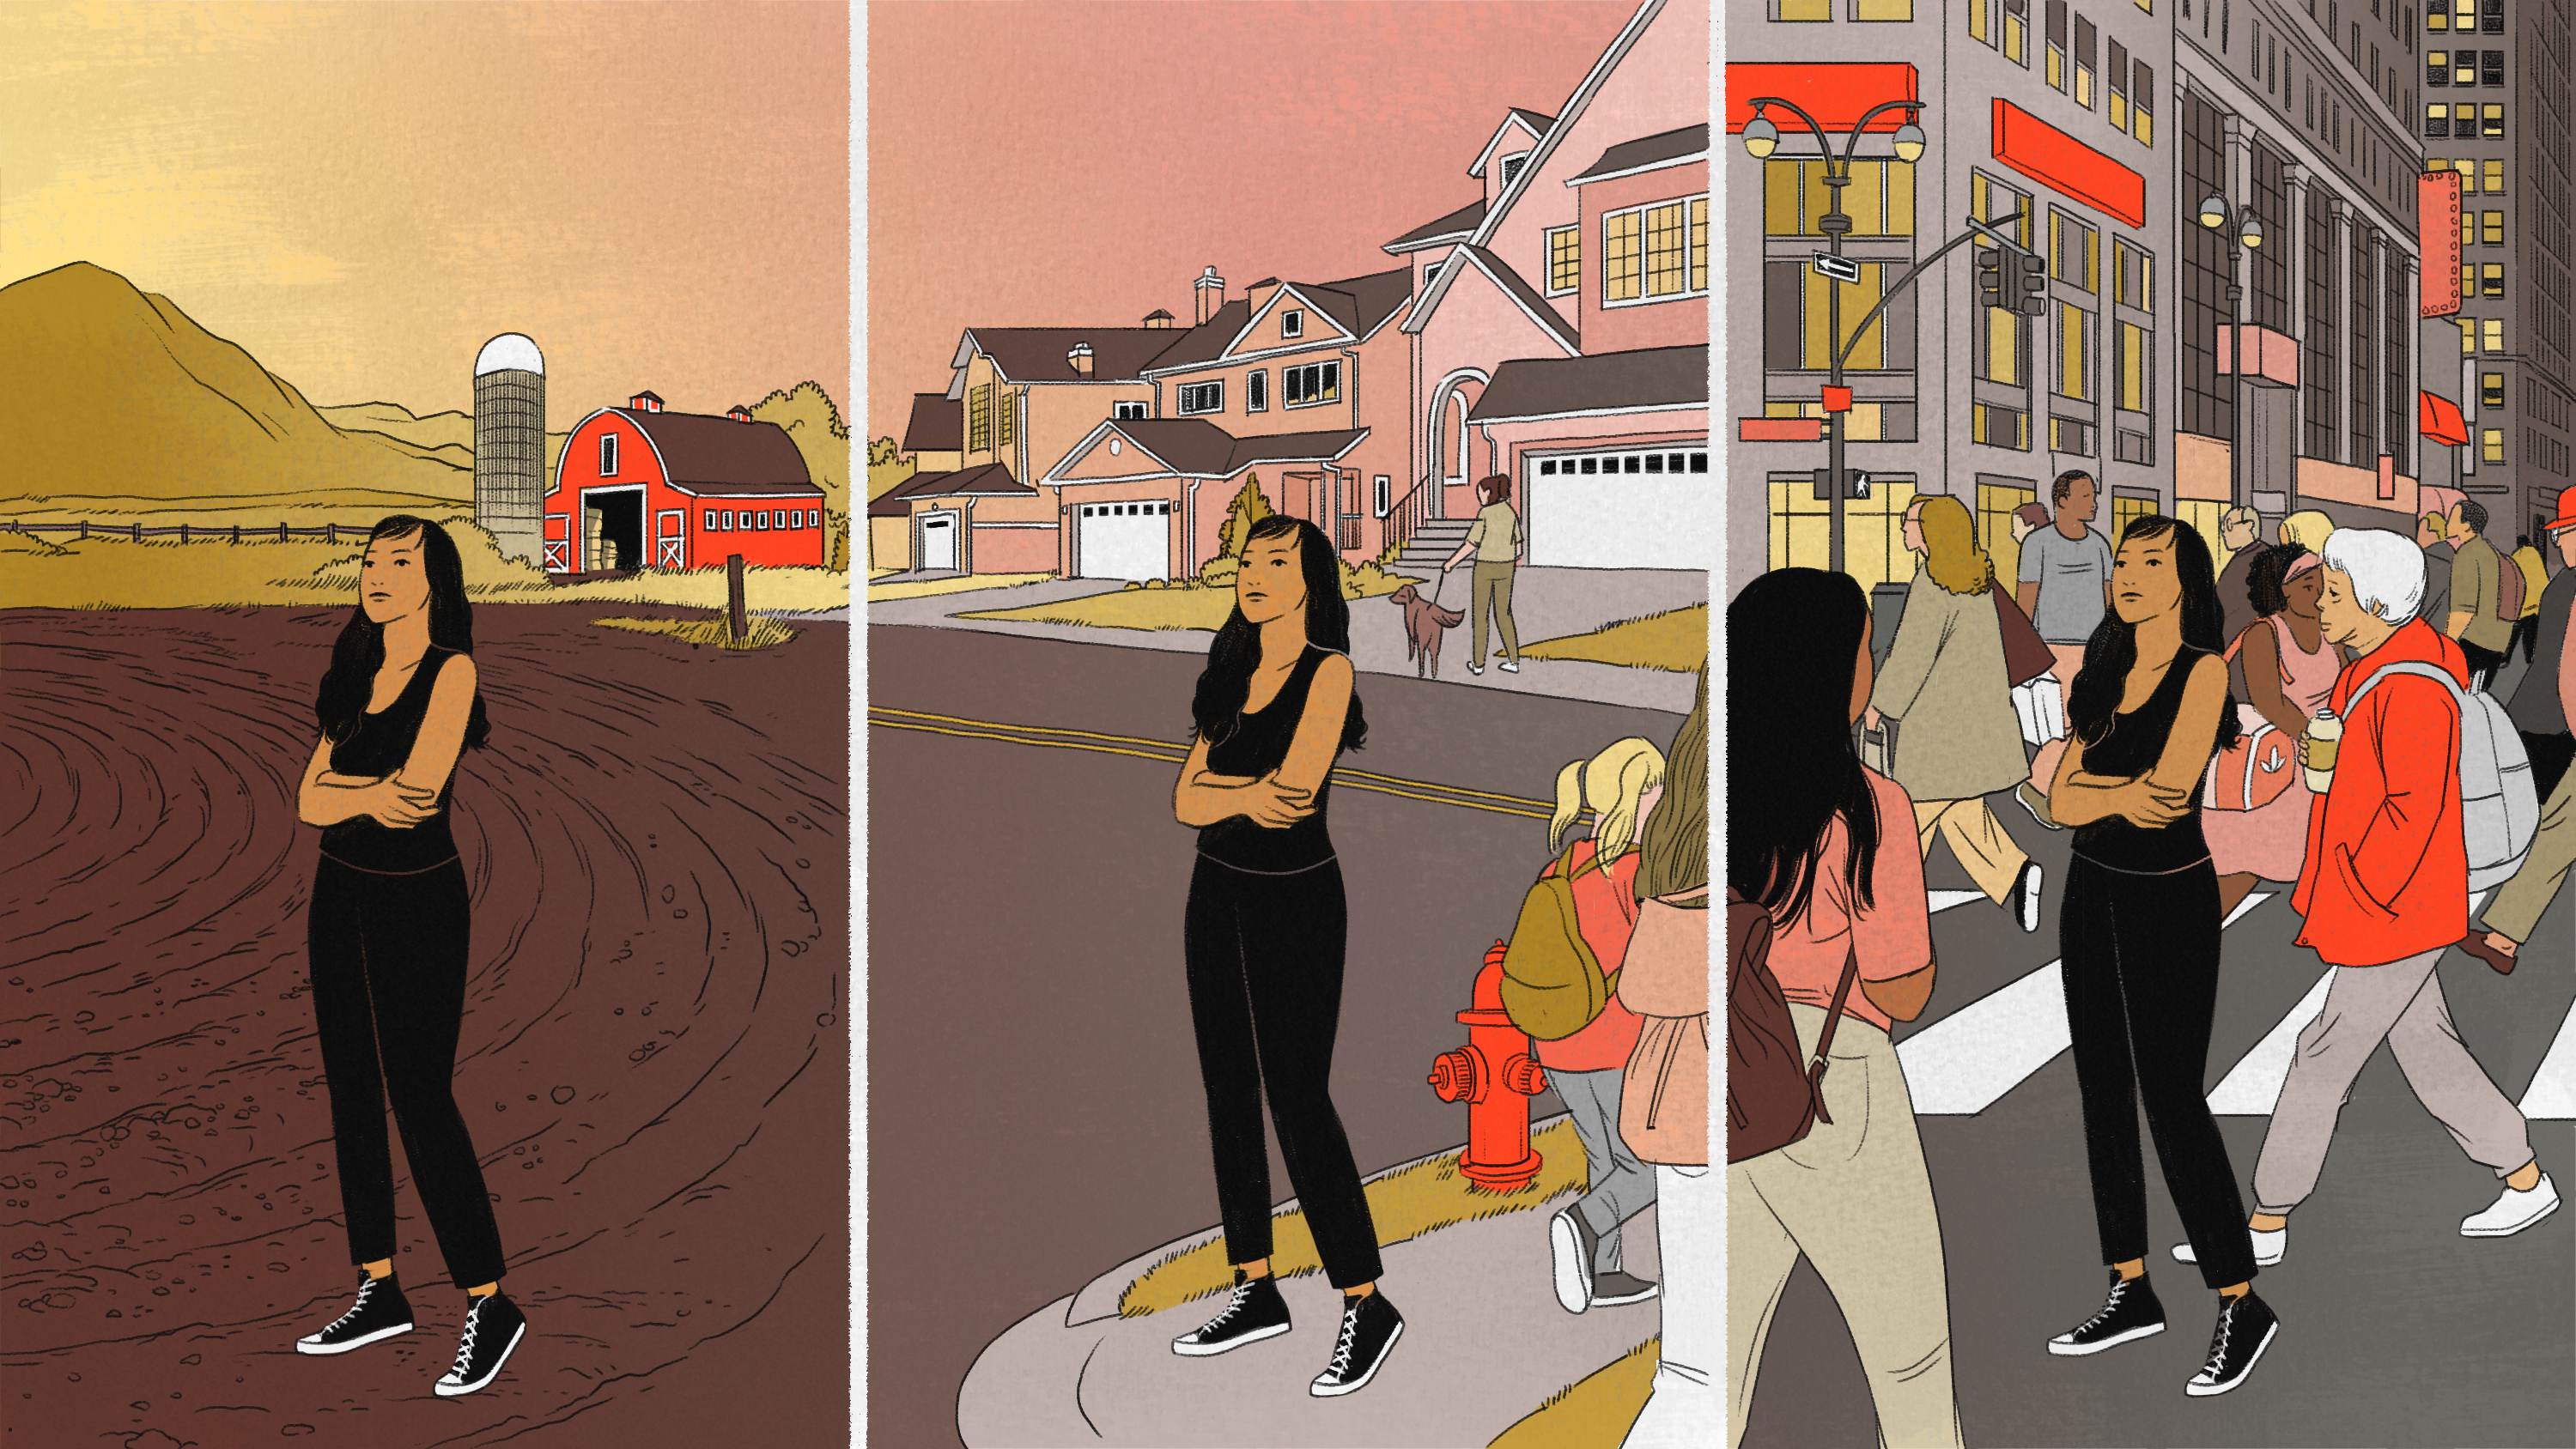 An illustration of an Asian woman hugging her arms in three environments: rural, suburban, and urban.